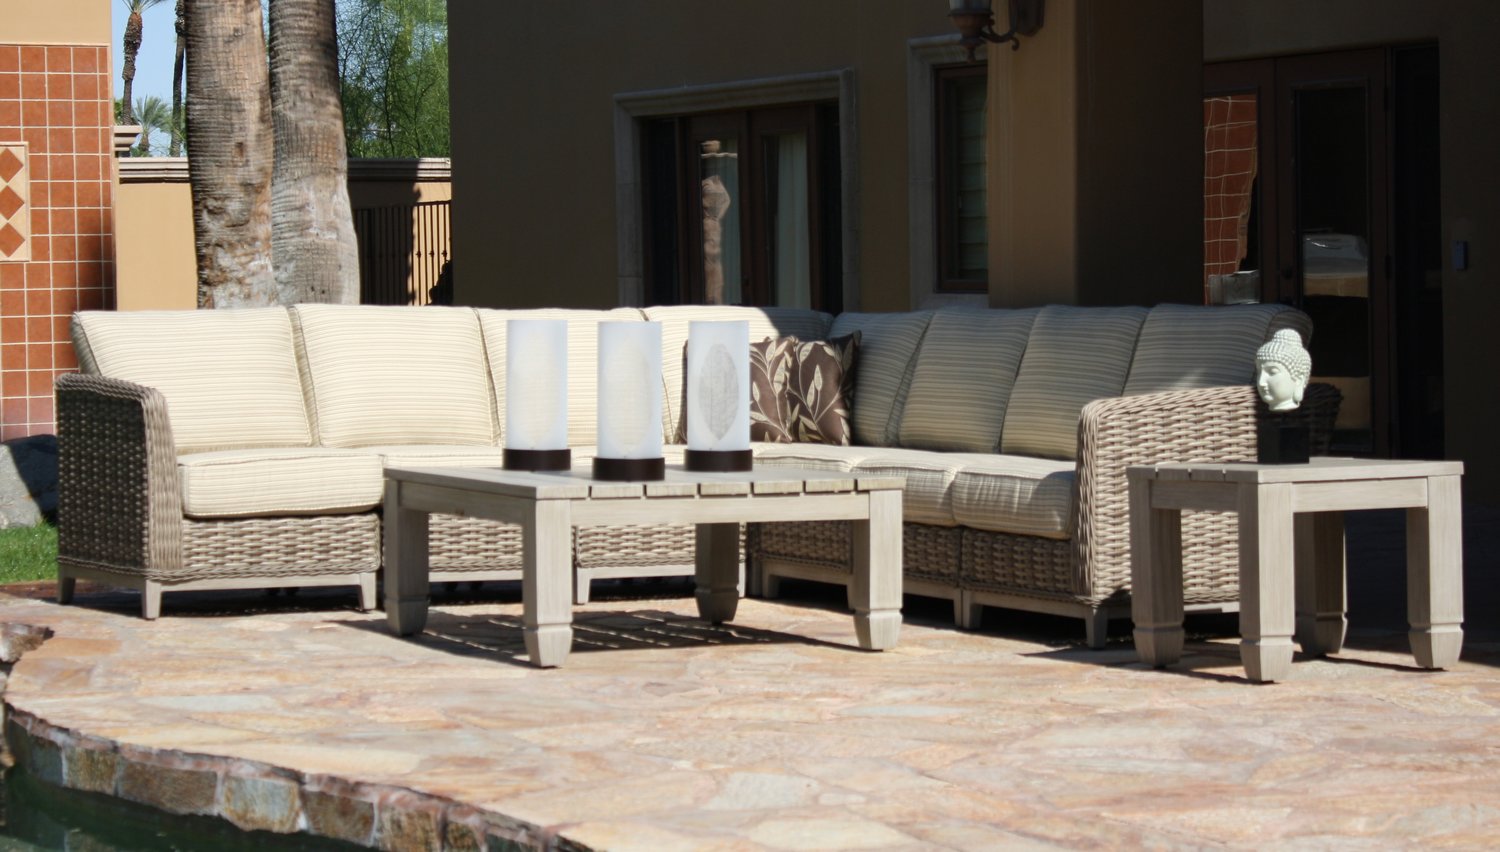 Catalina Armless Chair by Patio Renaissance